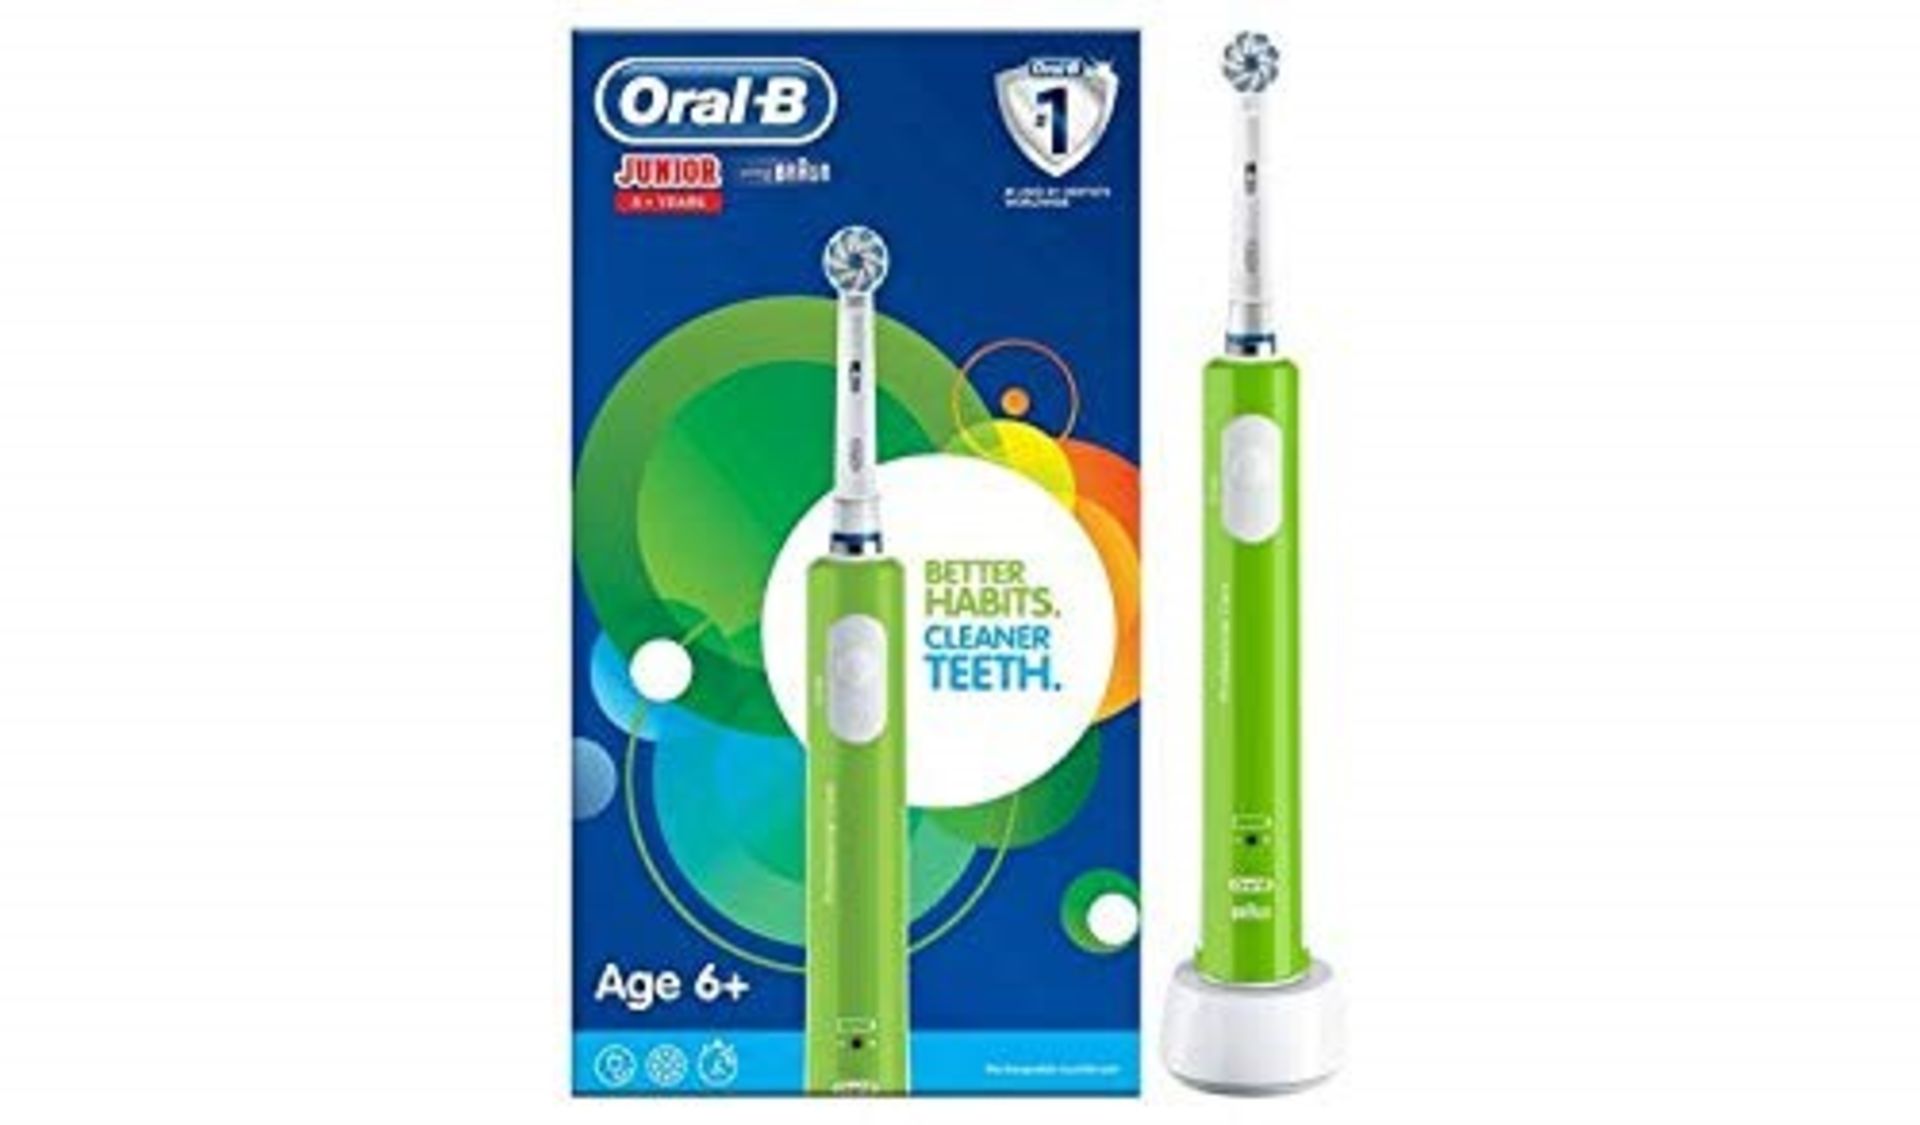 Oral-B Junior Kids Electric Rechargeable Toothbrush for Children Age 6-12, 1 Brush Han